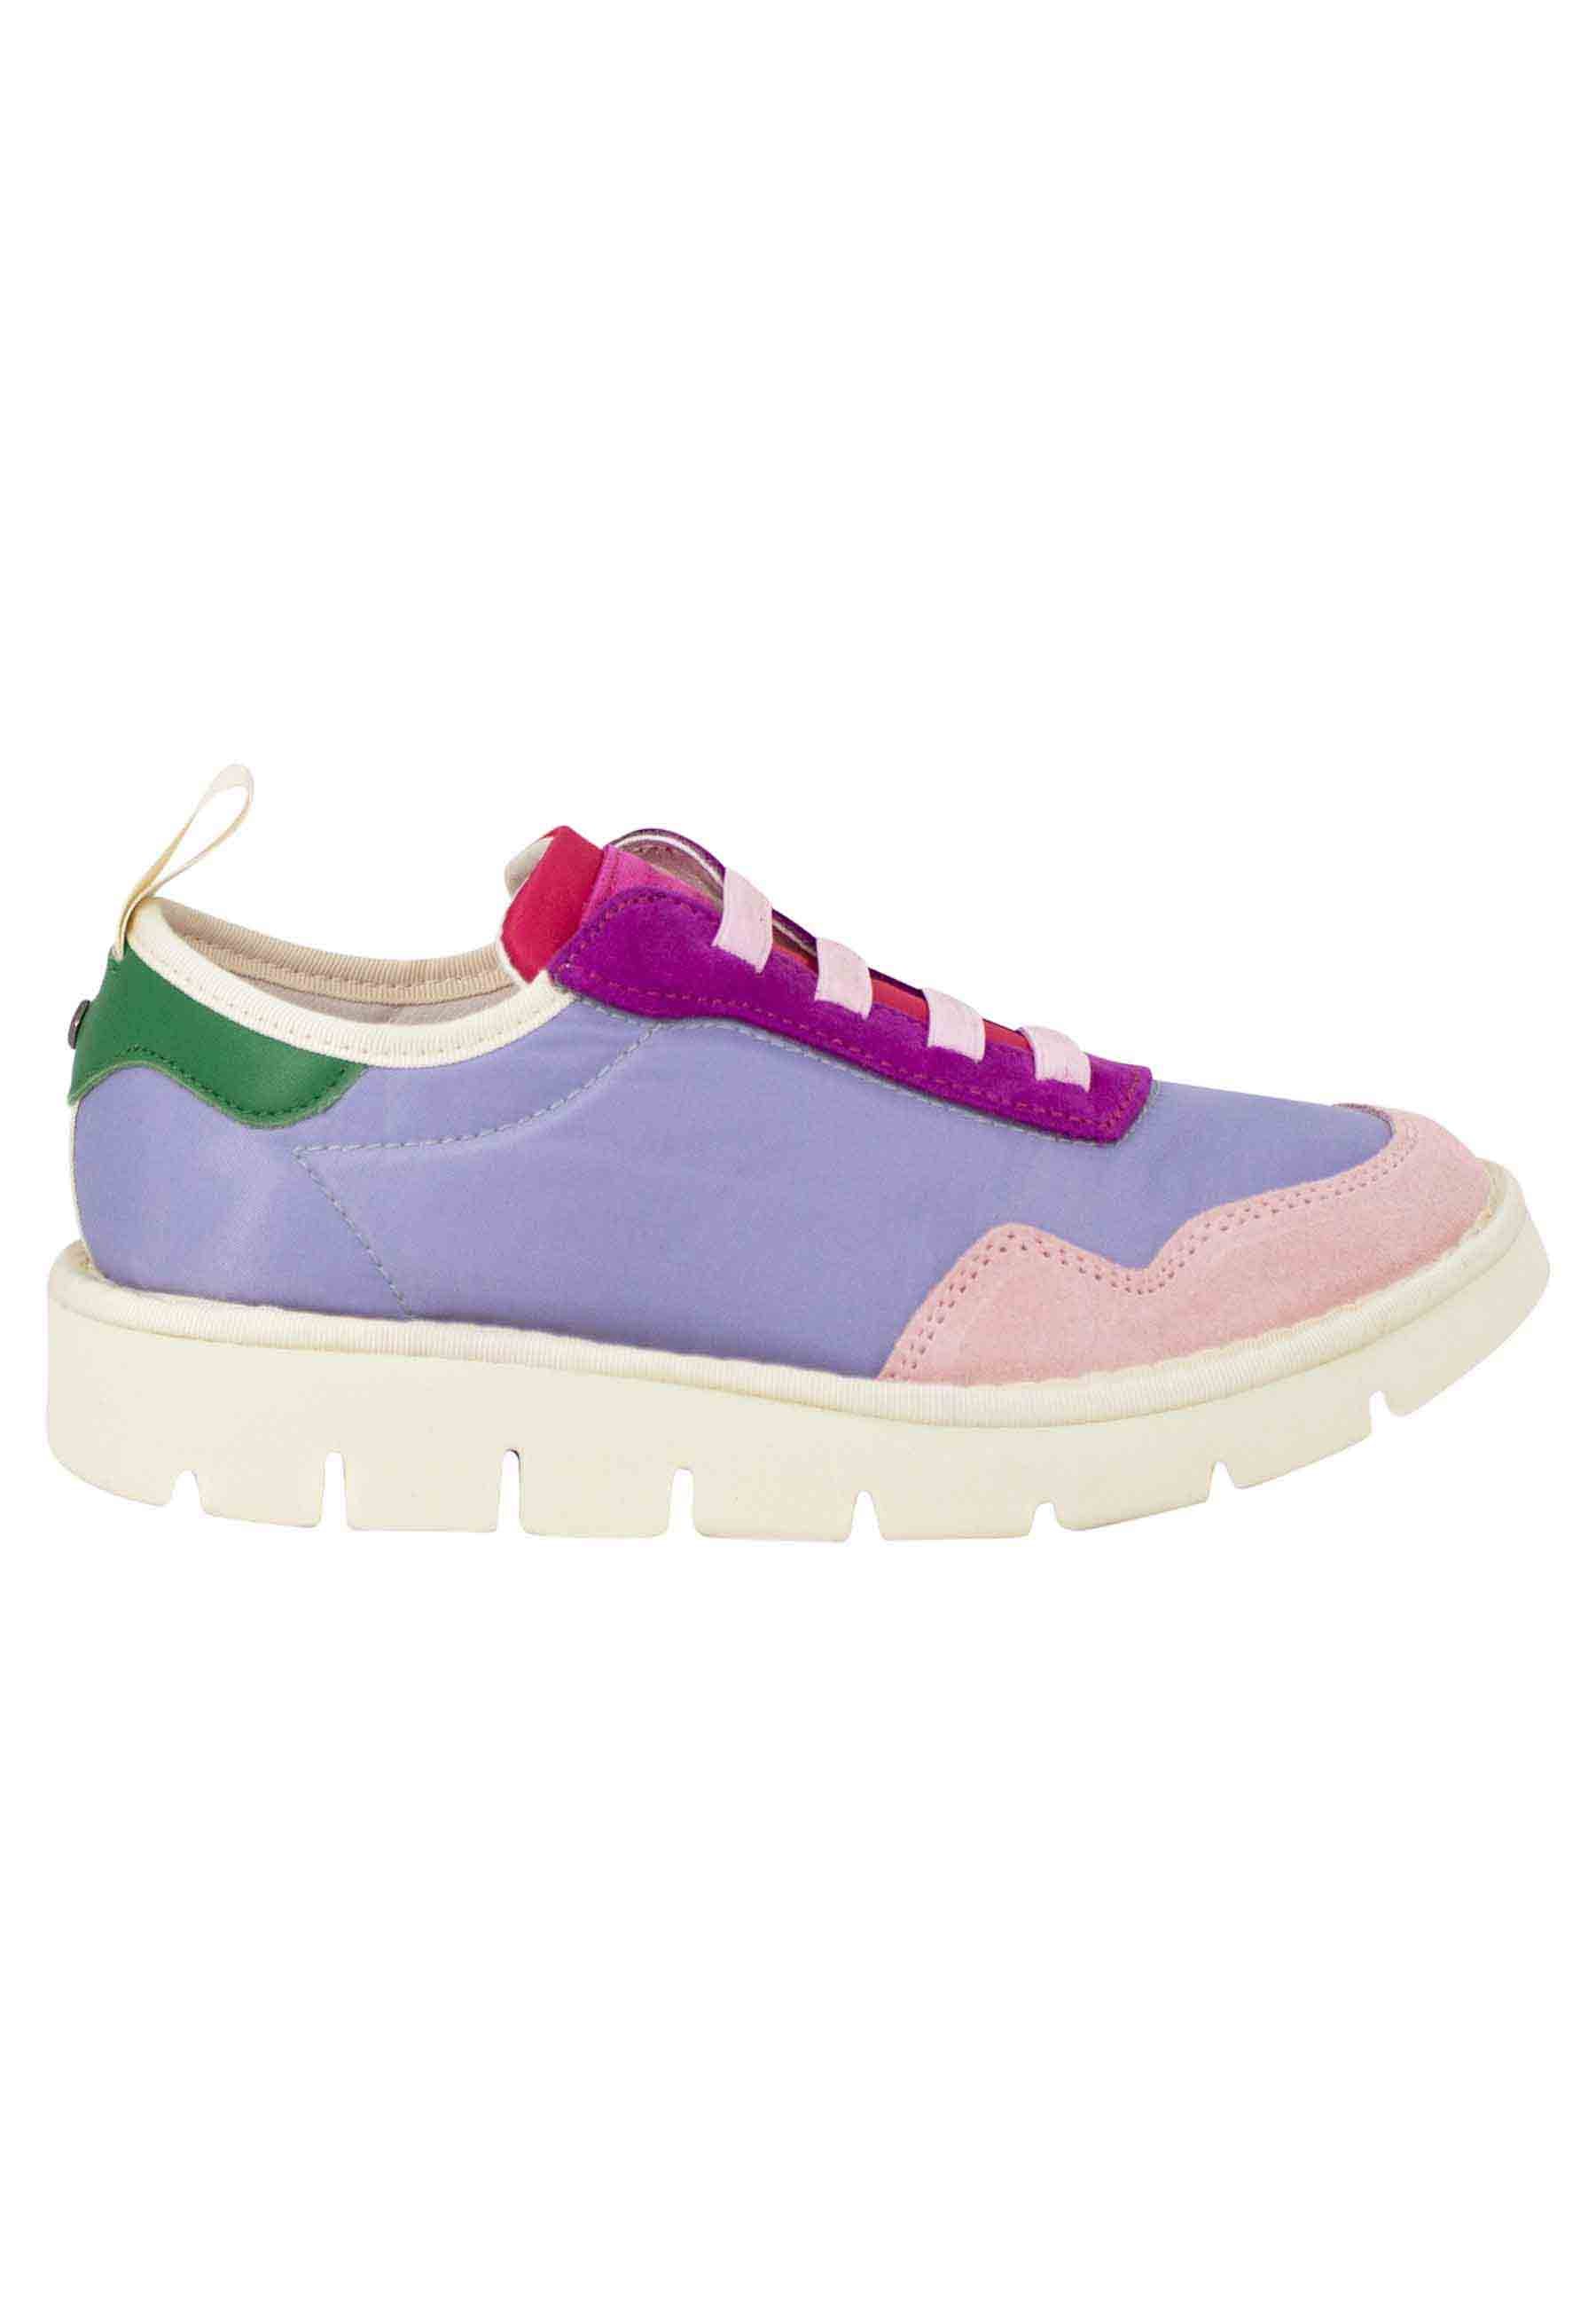 Women's sneakers in multicolor lilac fabric 00203012